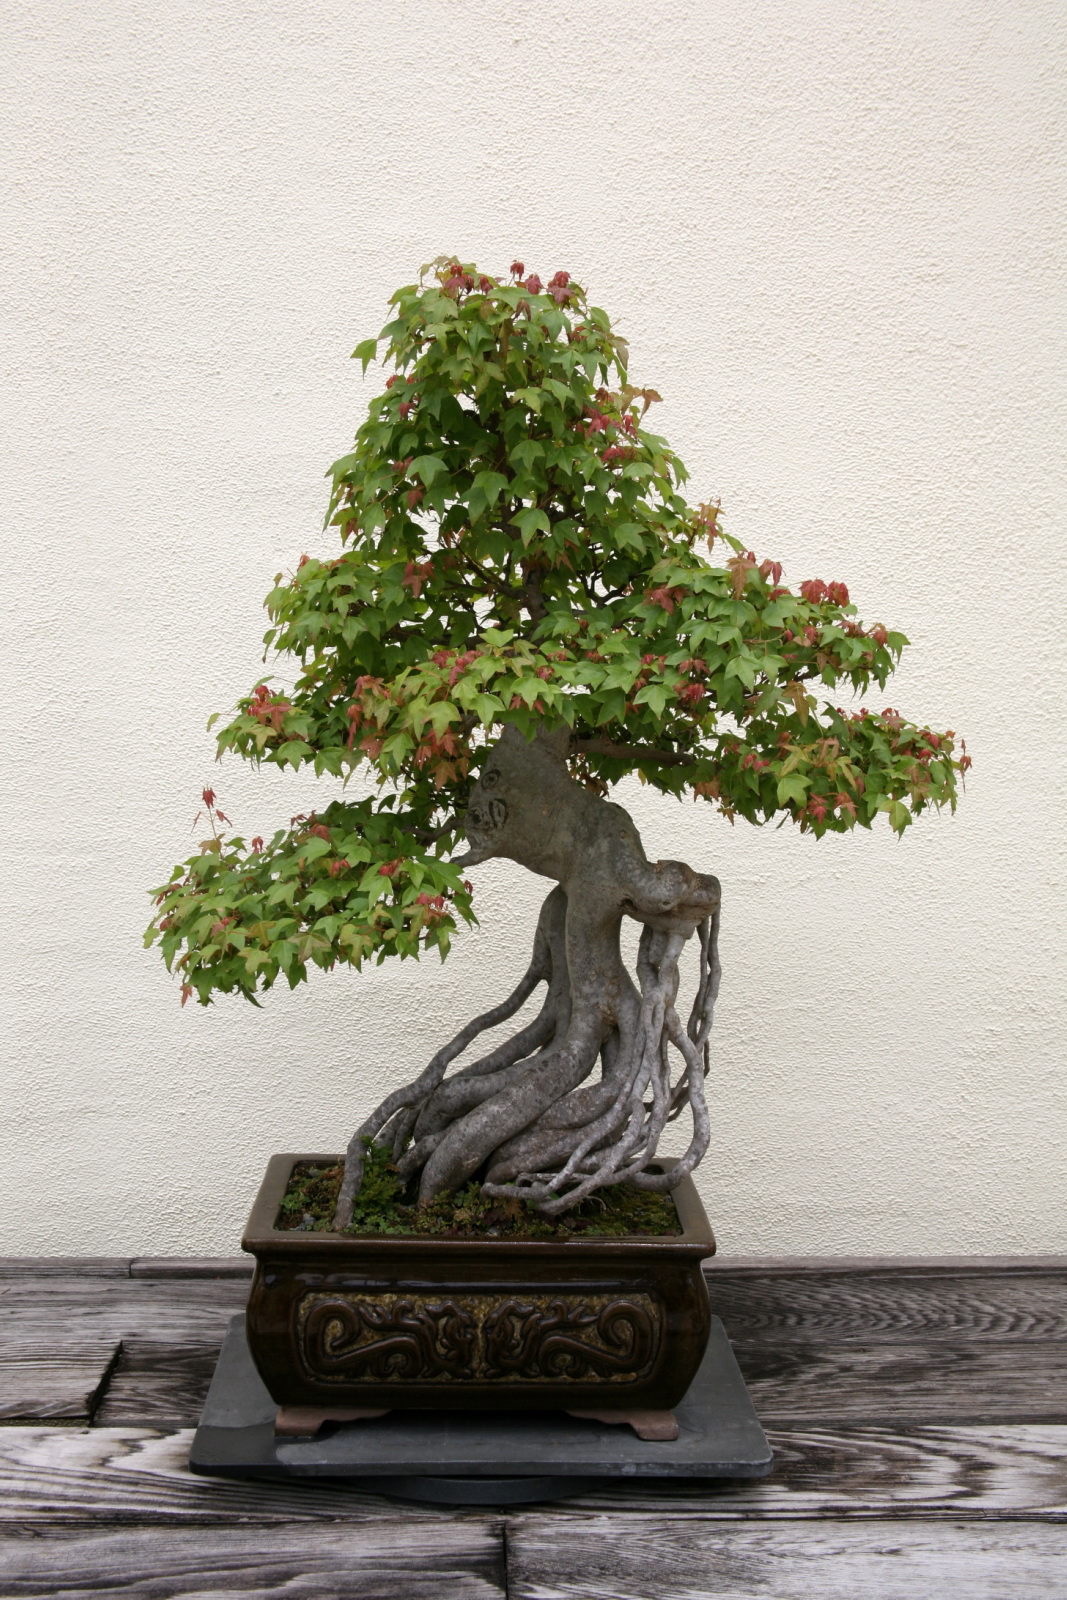 a bonsai tree in full display on a wooden table